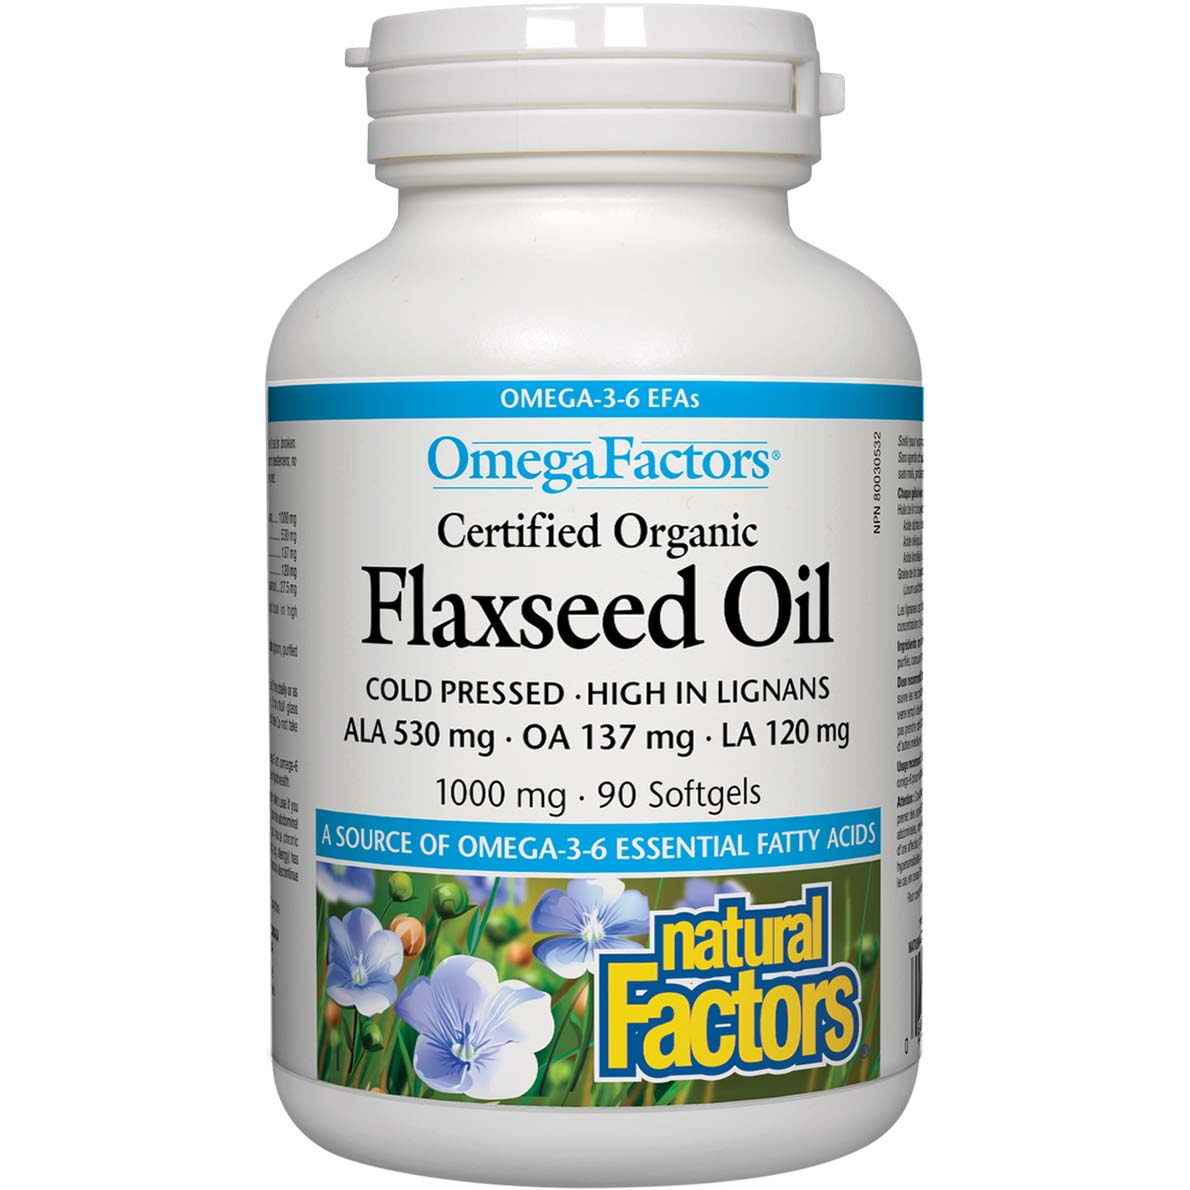 Natural Factors Flaxseed Oil Certified Organic, 1000 mg, 90 Softgels